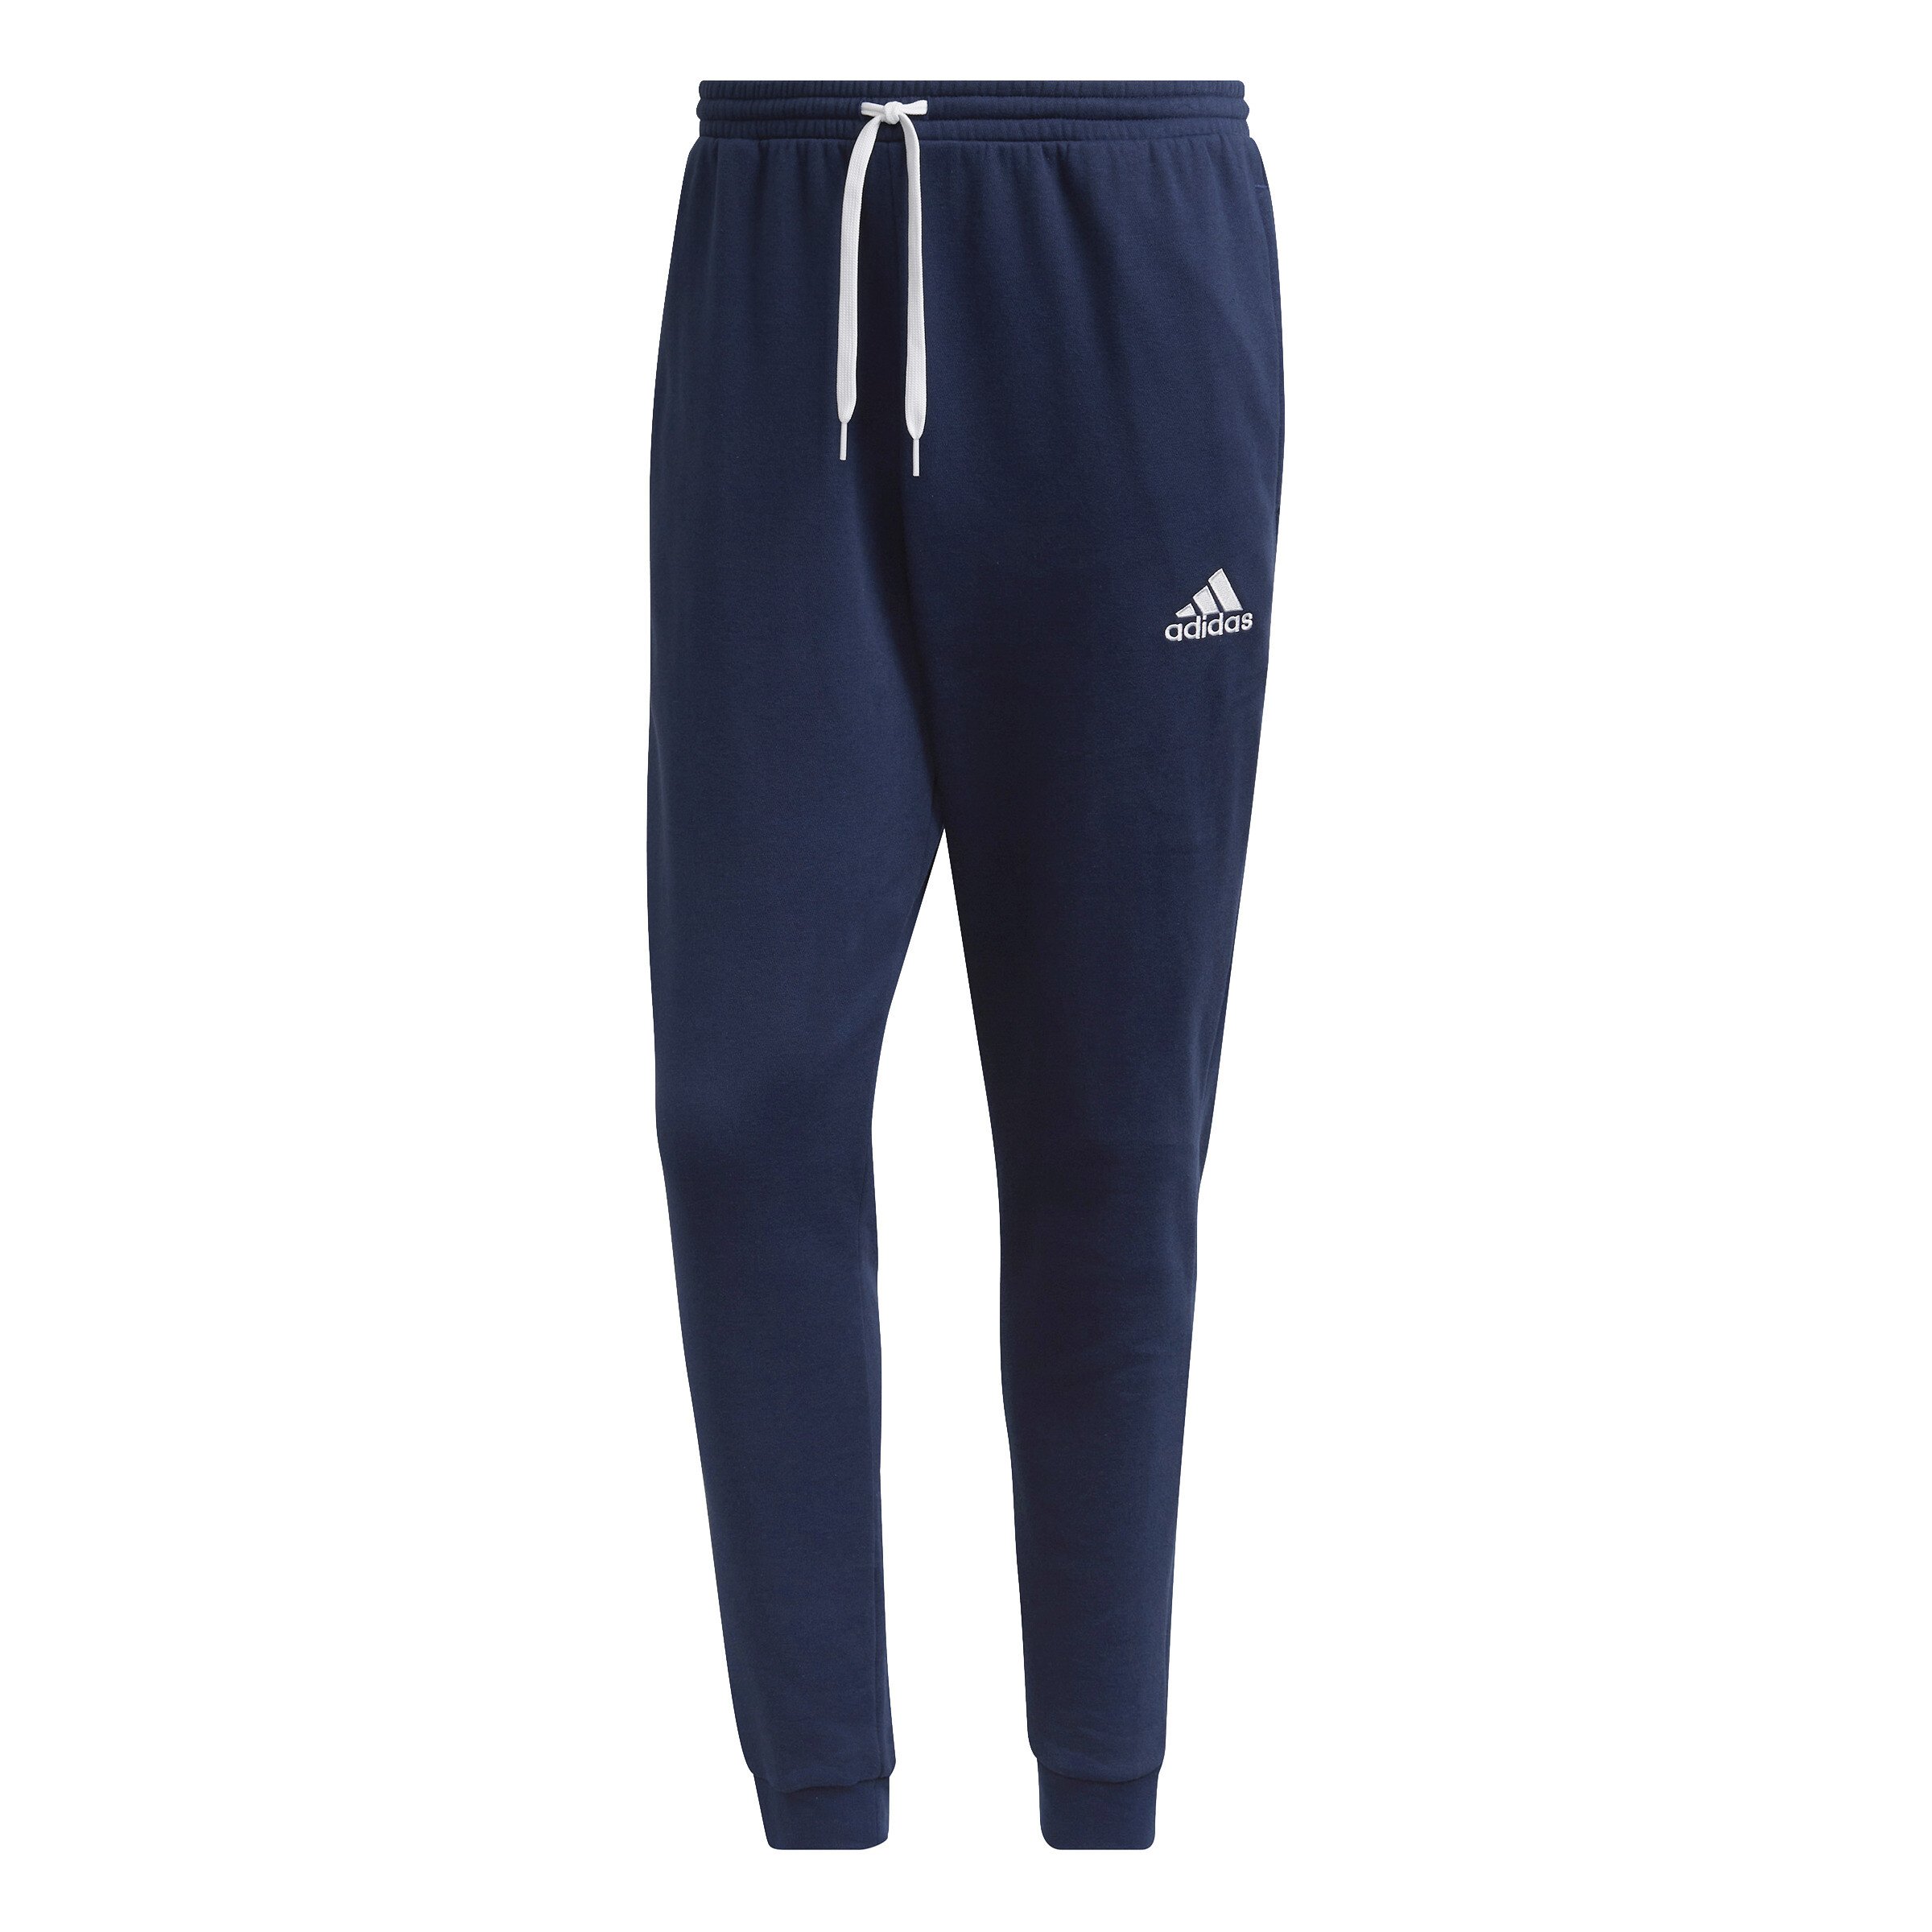 ADIDAS Mens M Gg Bos Pt Pants (Hk9829_S, Dgh Solid Grey, S) : Amazon.in:  Clothing & Accessories